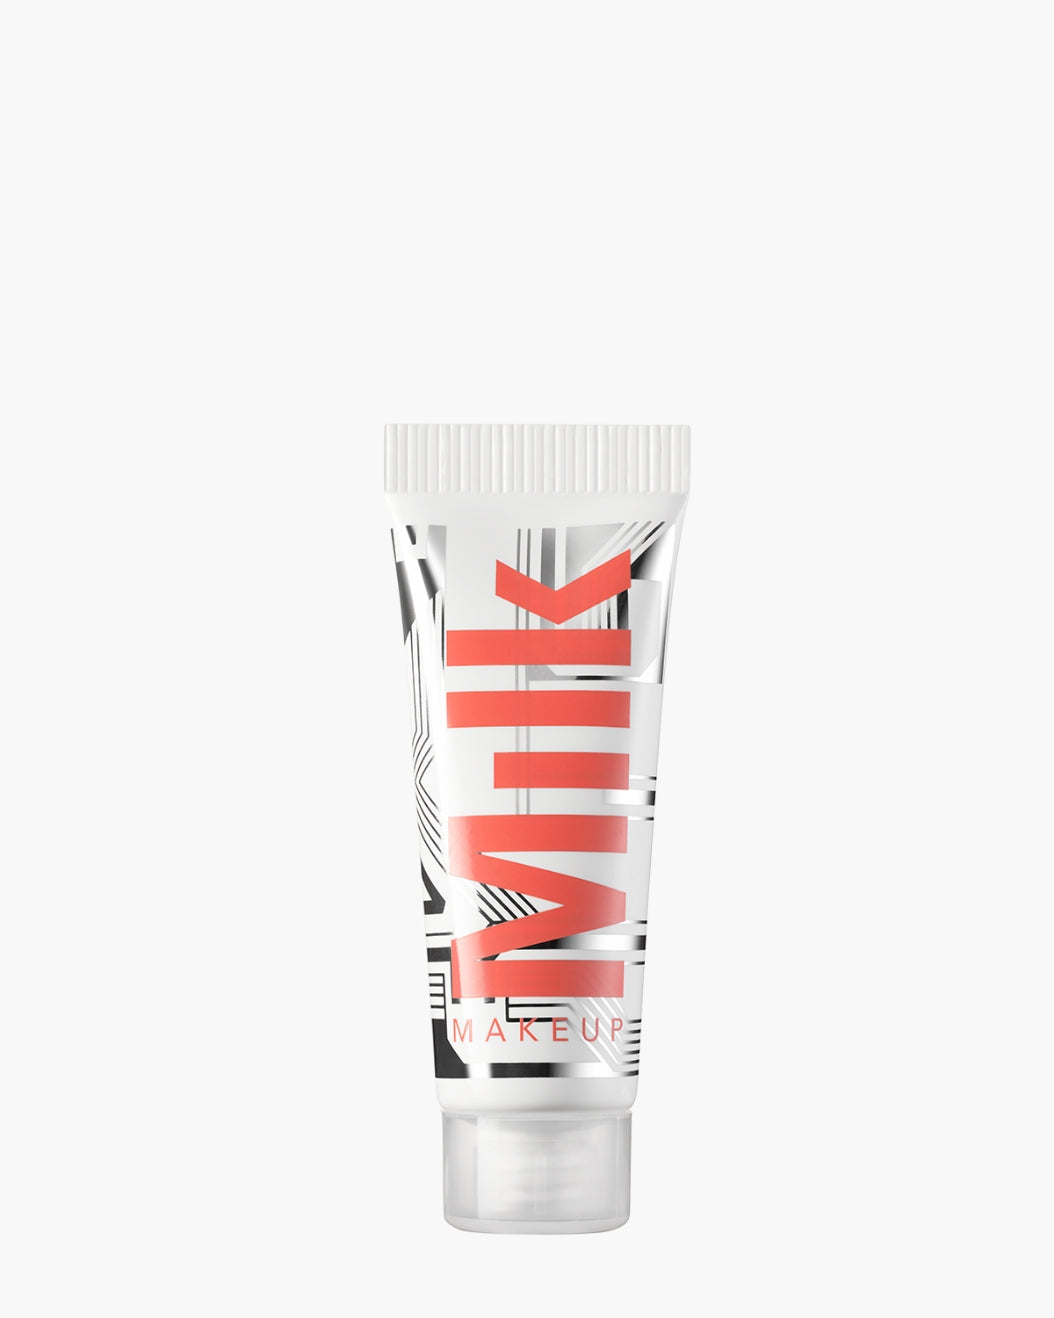 Product image of Milk Makeup Bionic Blush in teleport